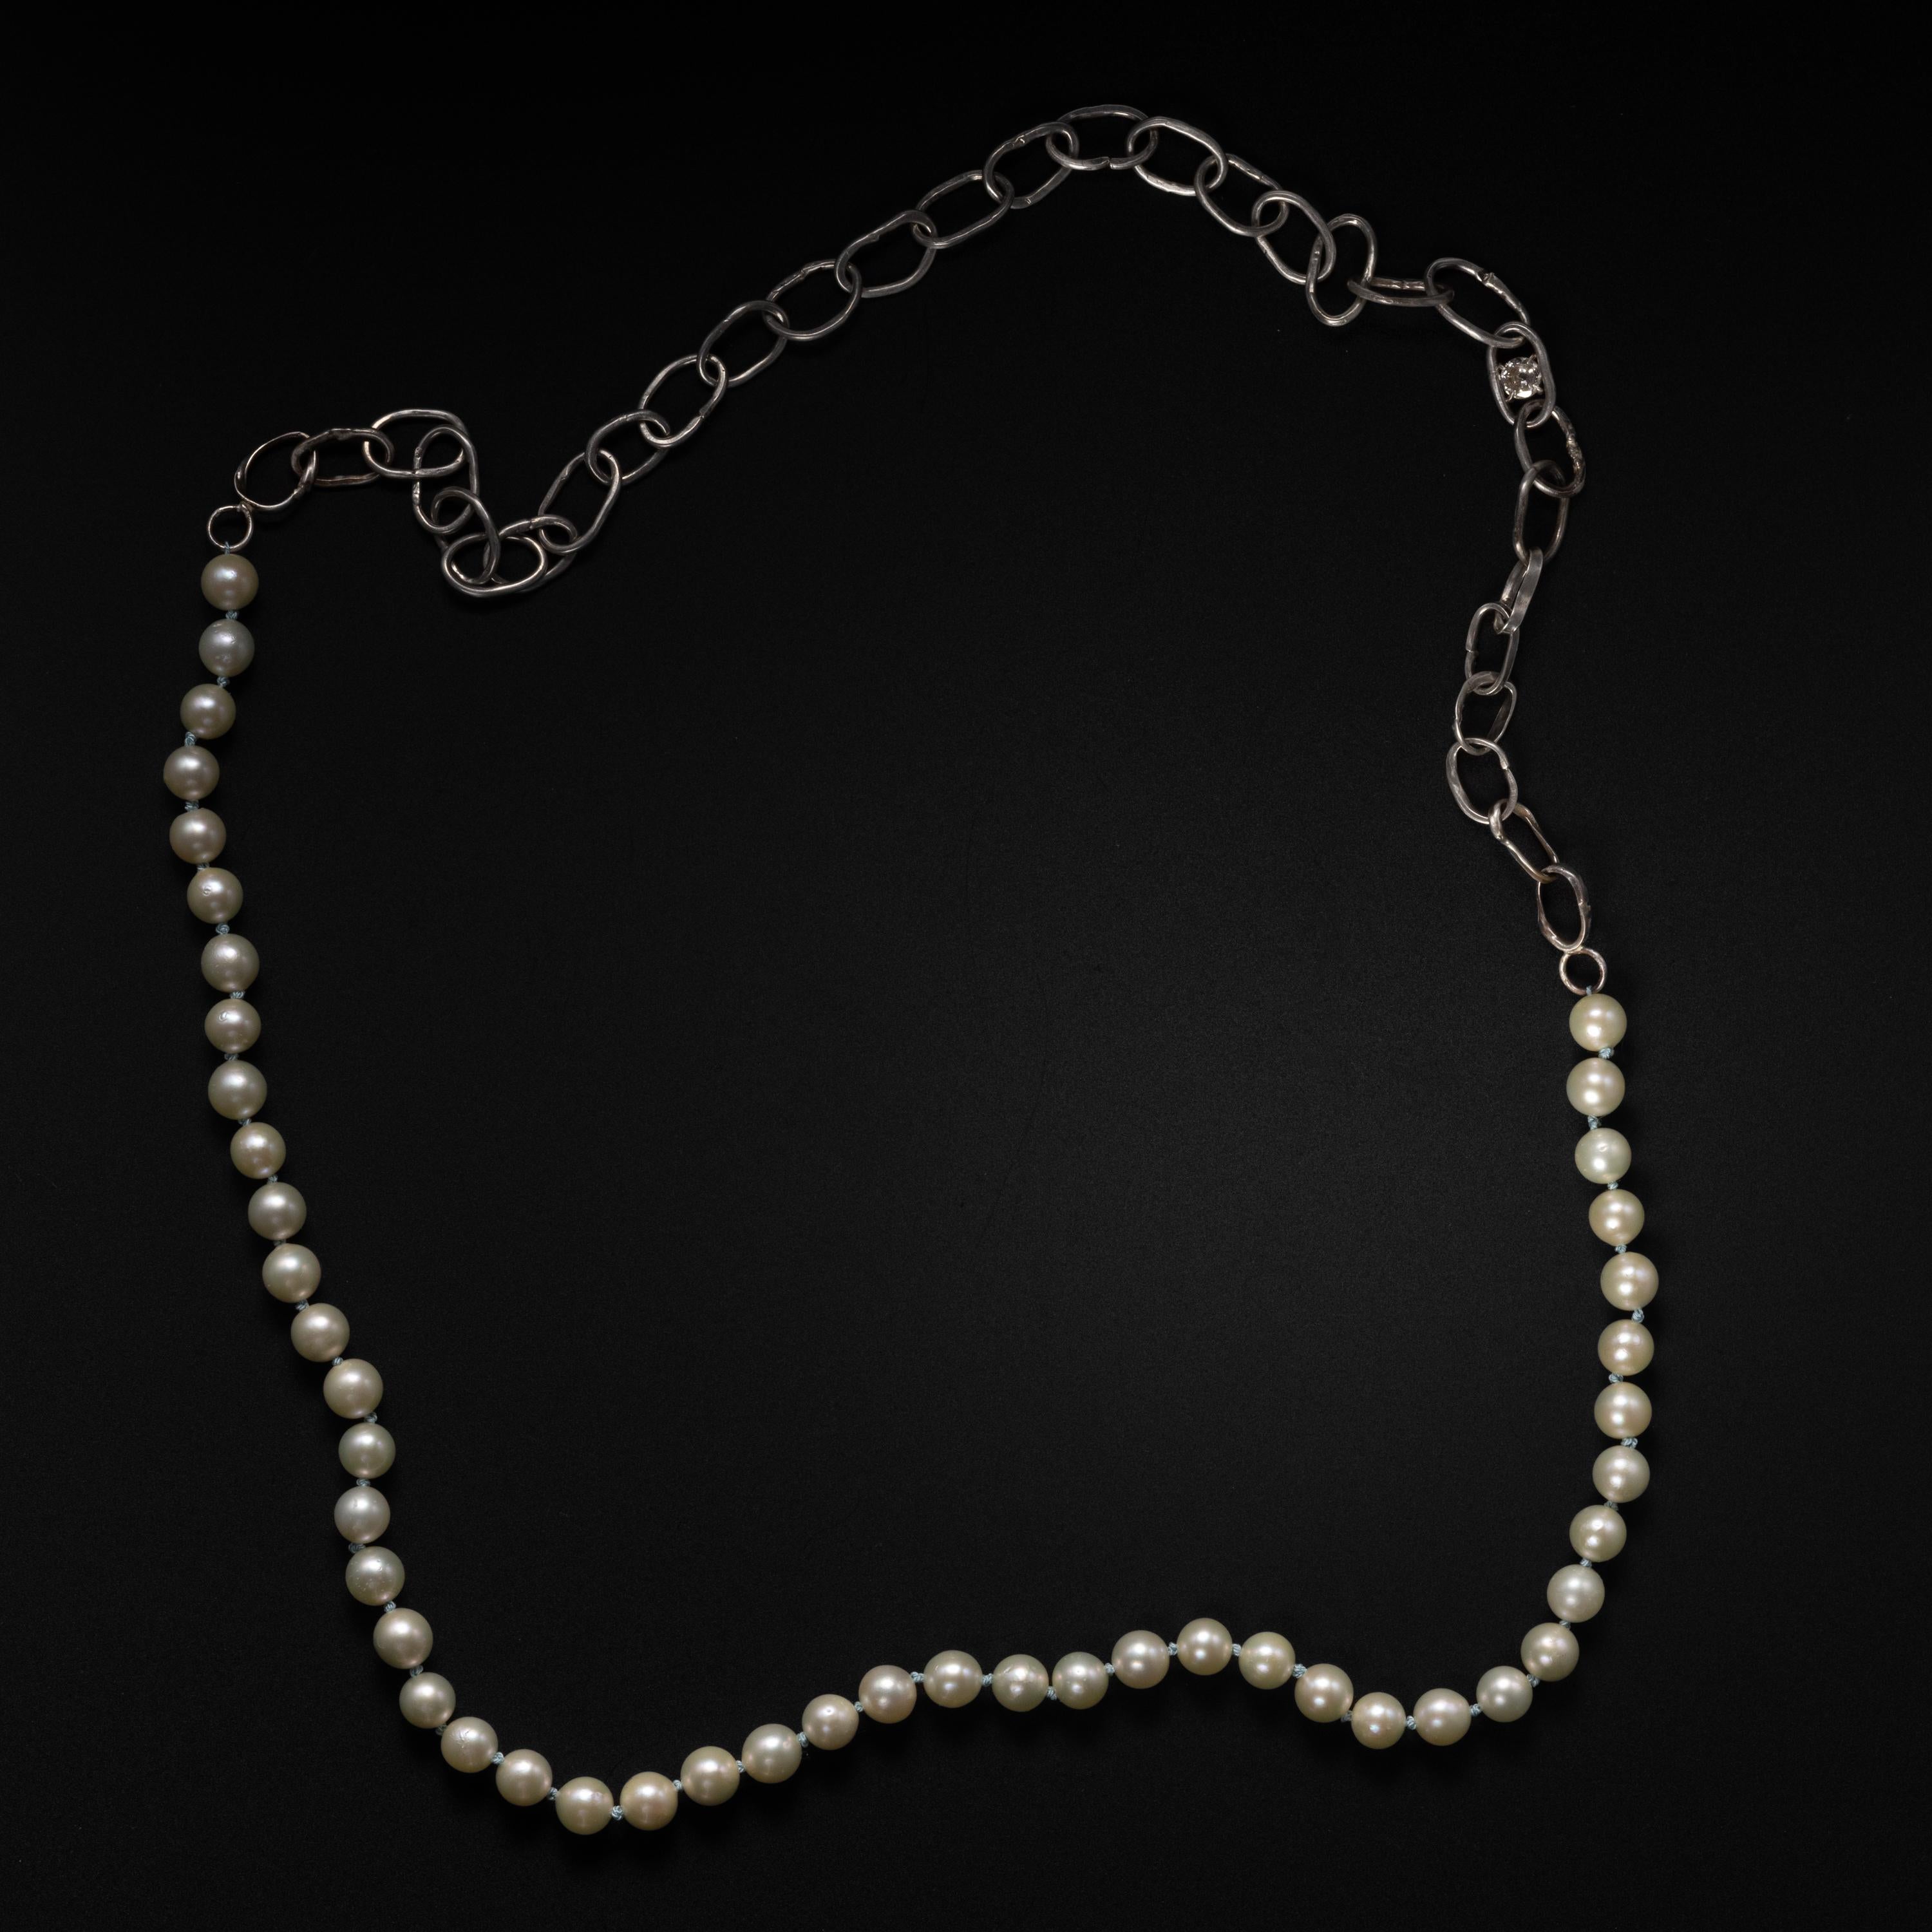 This brand-new one-of-a-kind necklace was created by PEARL/SAW, creator of  